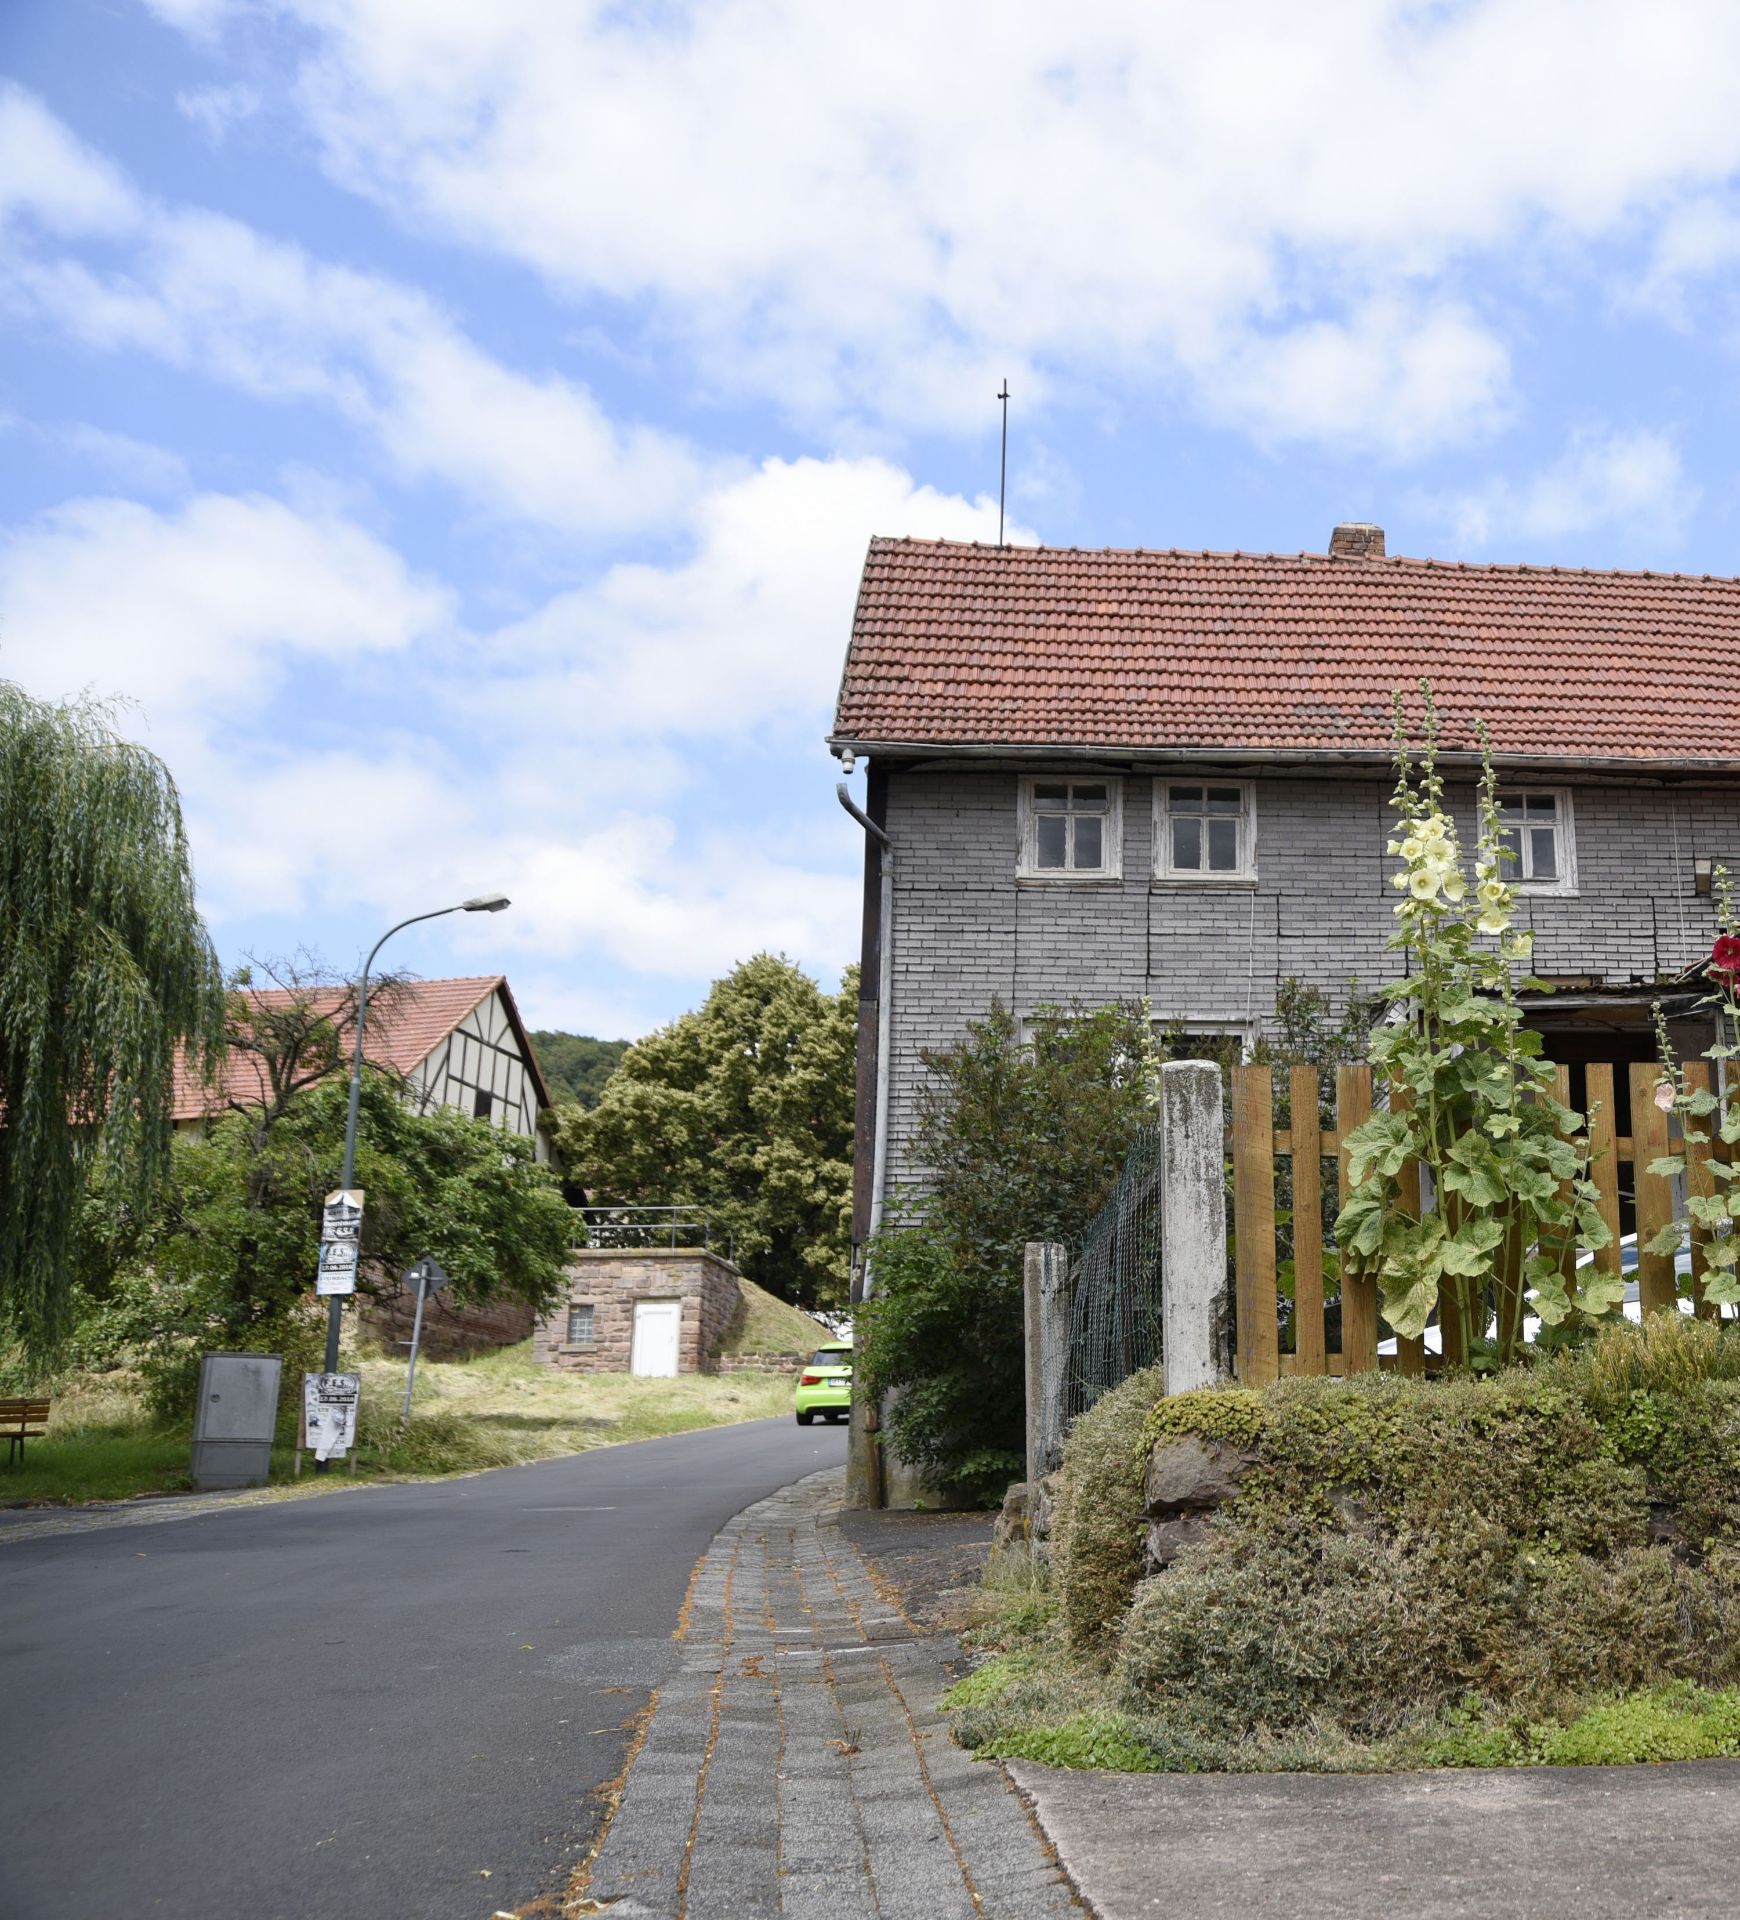 Freehold Property With 691 SQM Of Land In The Village Of Unterstoppel, Germany! - Image 6 of 60